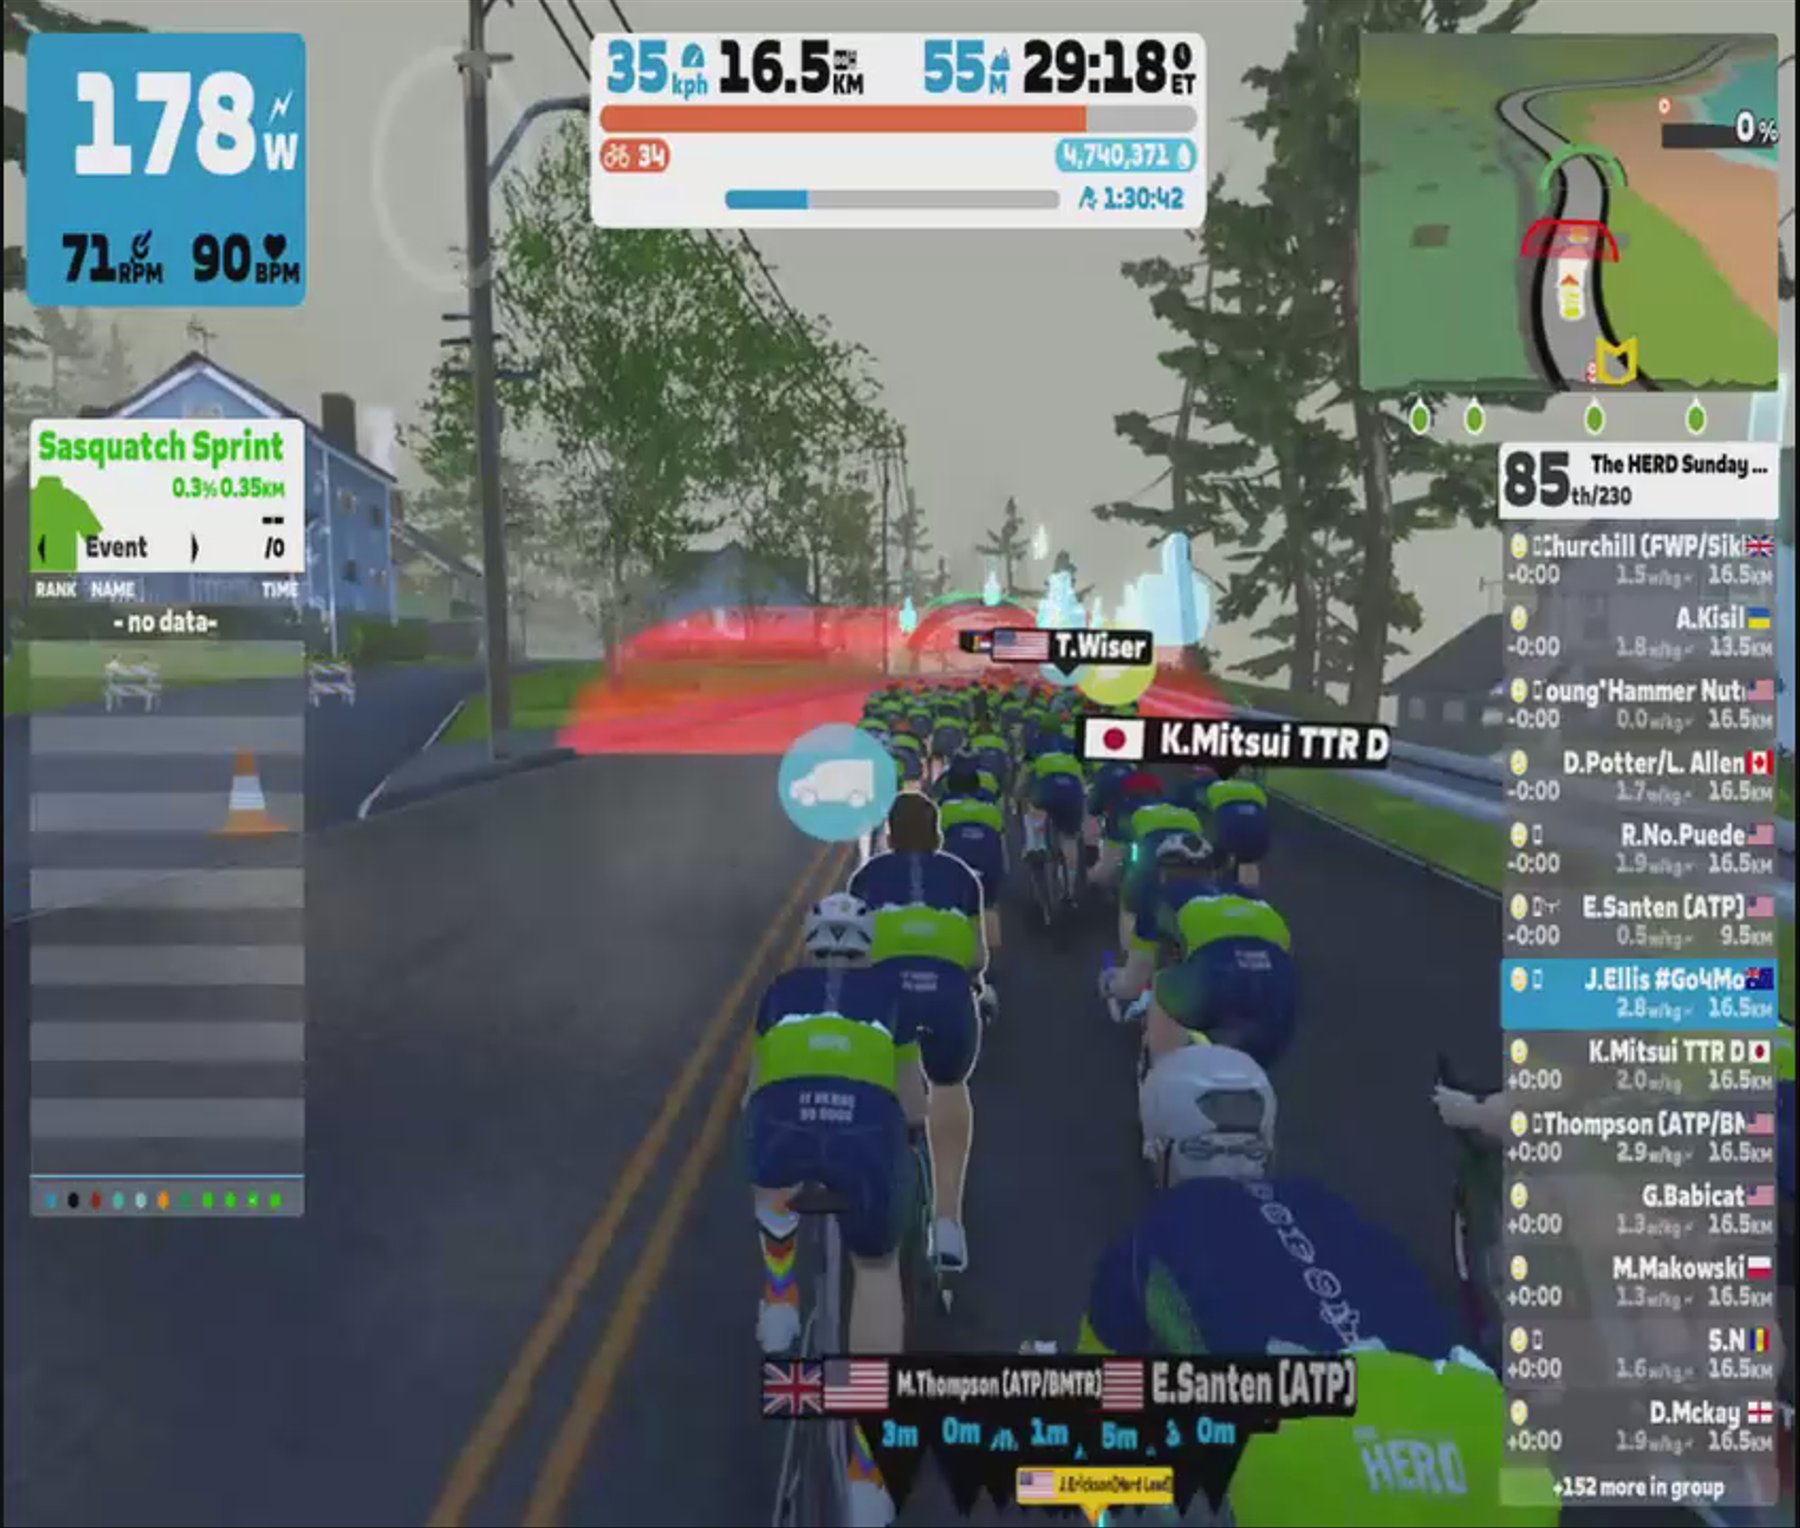 Zwift - Group Ride: The HERD Sunday Endurance (D) on Sugar Cookie in Watopia